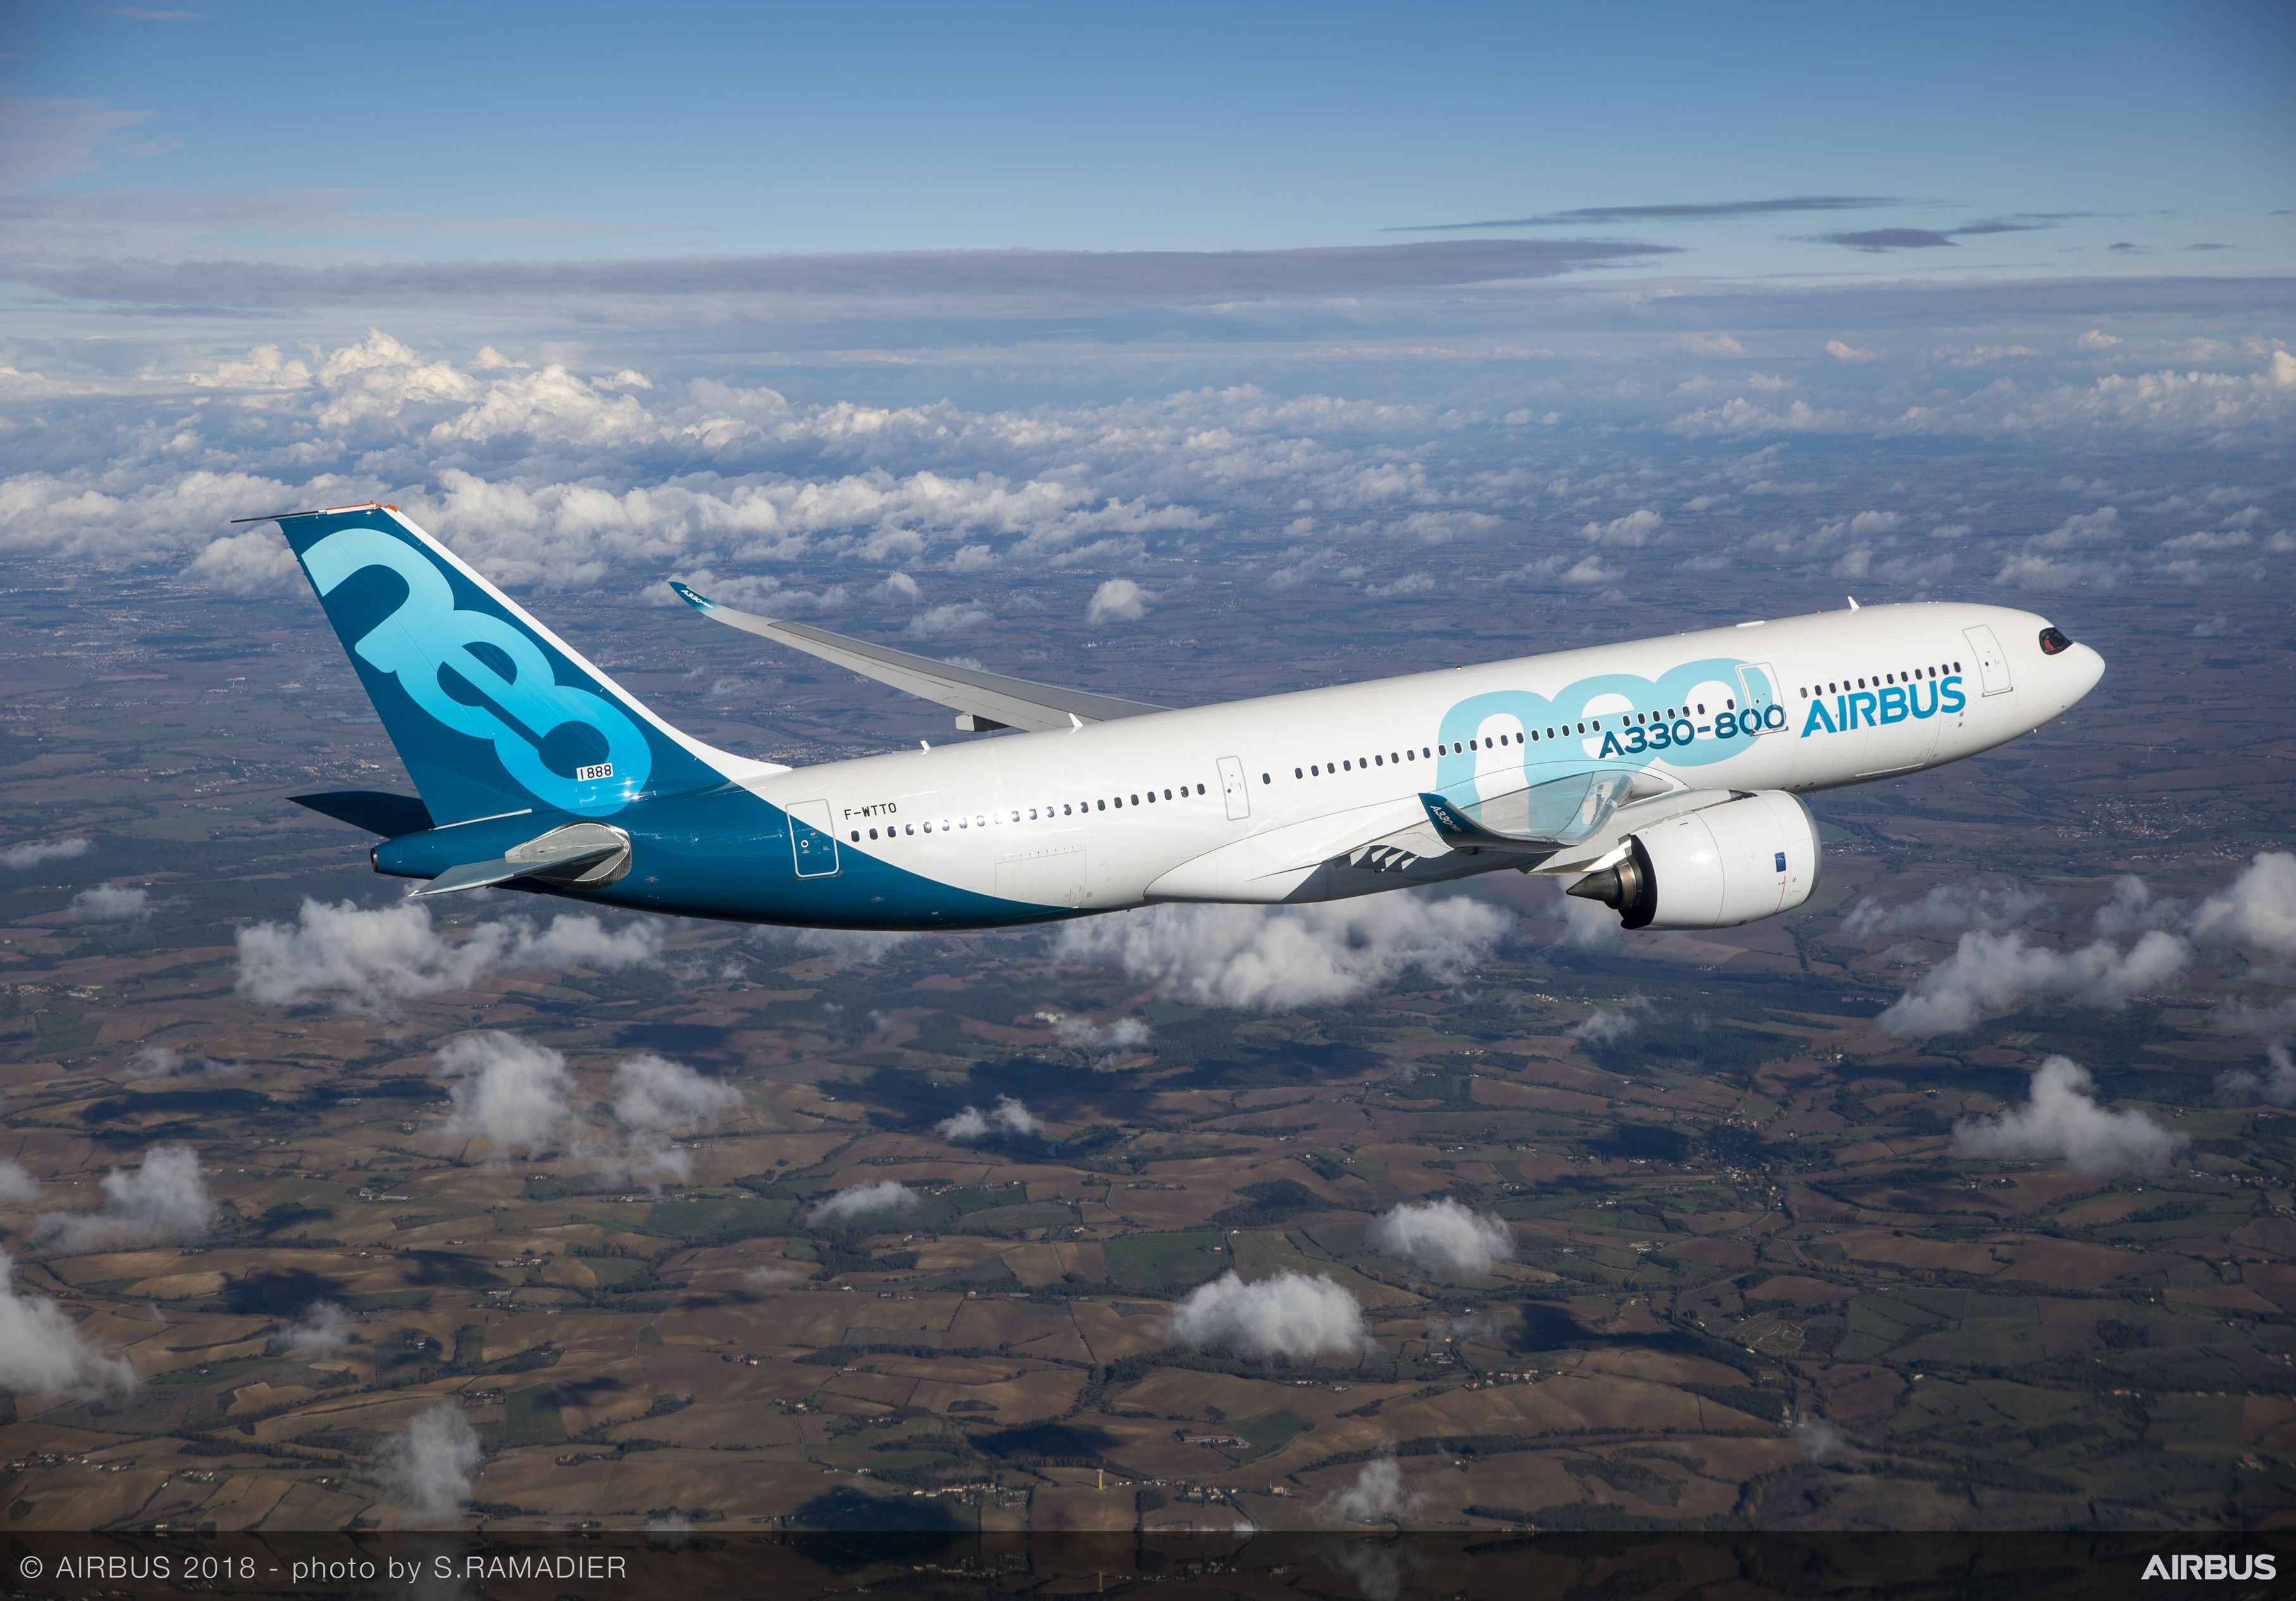 Airbus A330-800 is going to be ready to start mid 2020